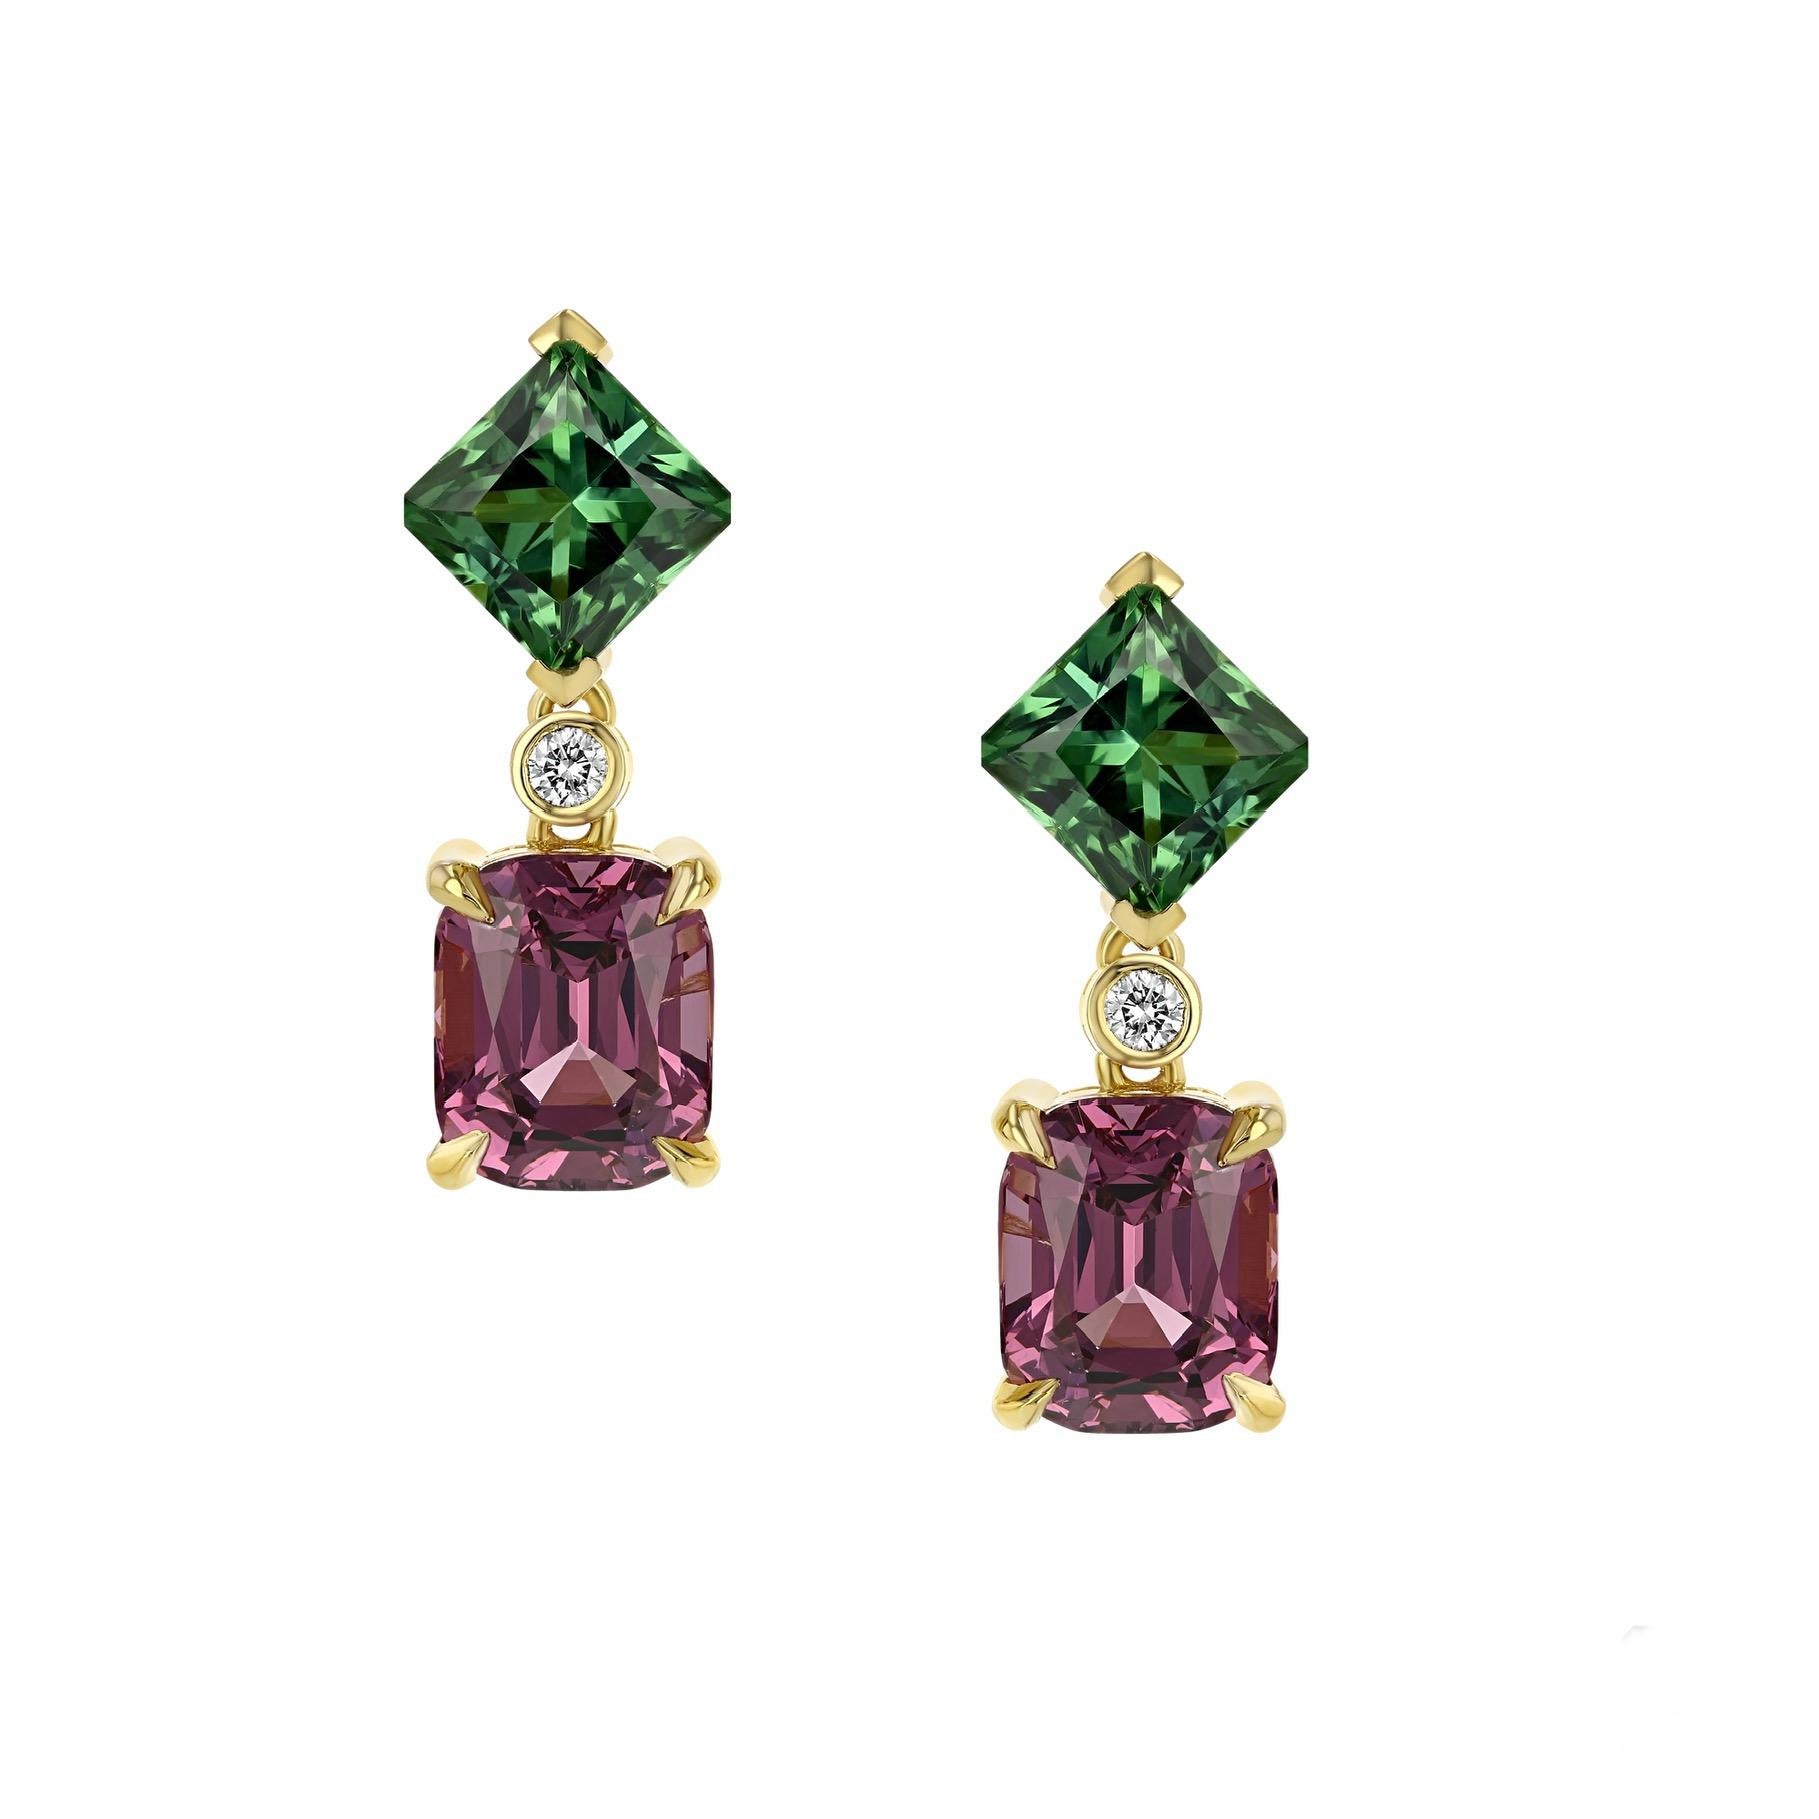 18K yellow gold earrings, featuring 5.48cts of untreated Burmese spinels, paired with 2.82cts of untreated Brazilian Green Tourmalines, and 0.06cts white diamonds. 